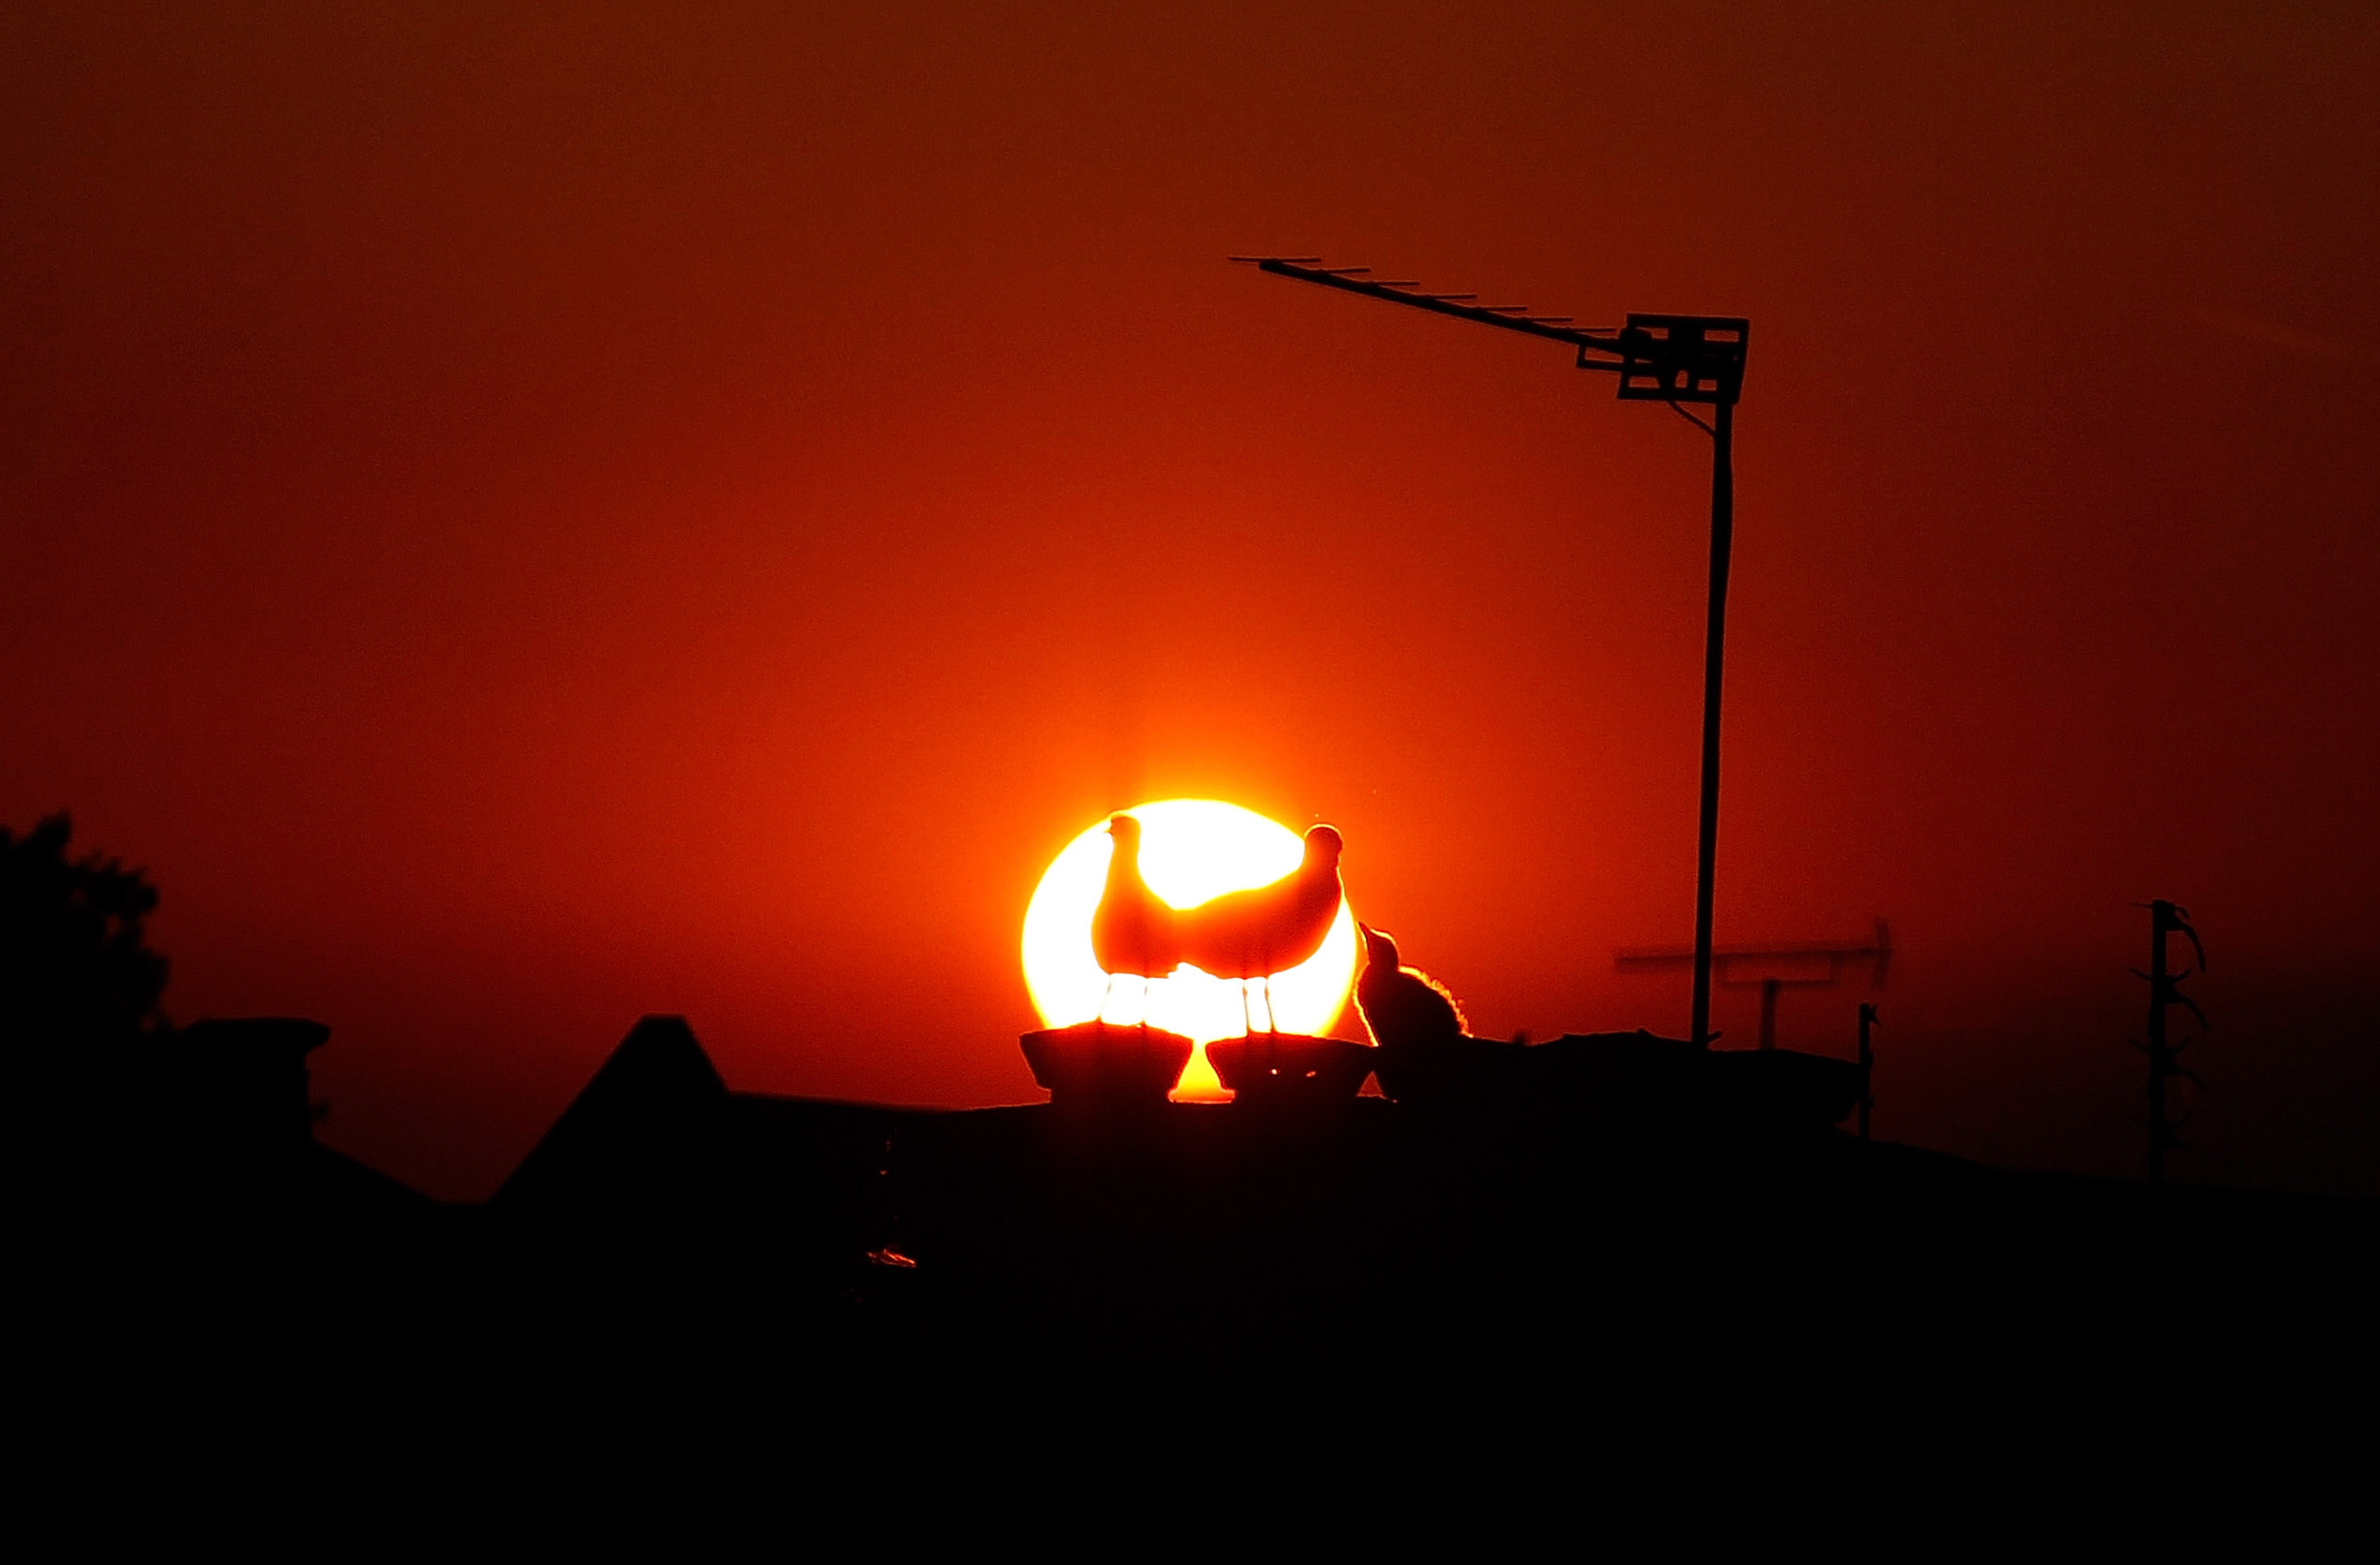 A family of seagulls are silhouetted on the rooftops of Peckham as the sun goes down (Mary Turner&mdash;Getty Images)